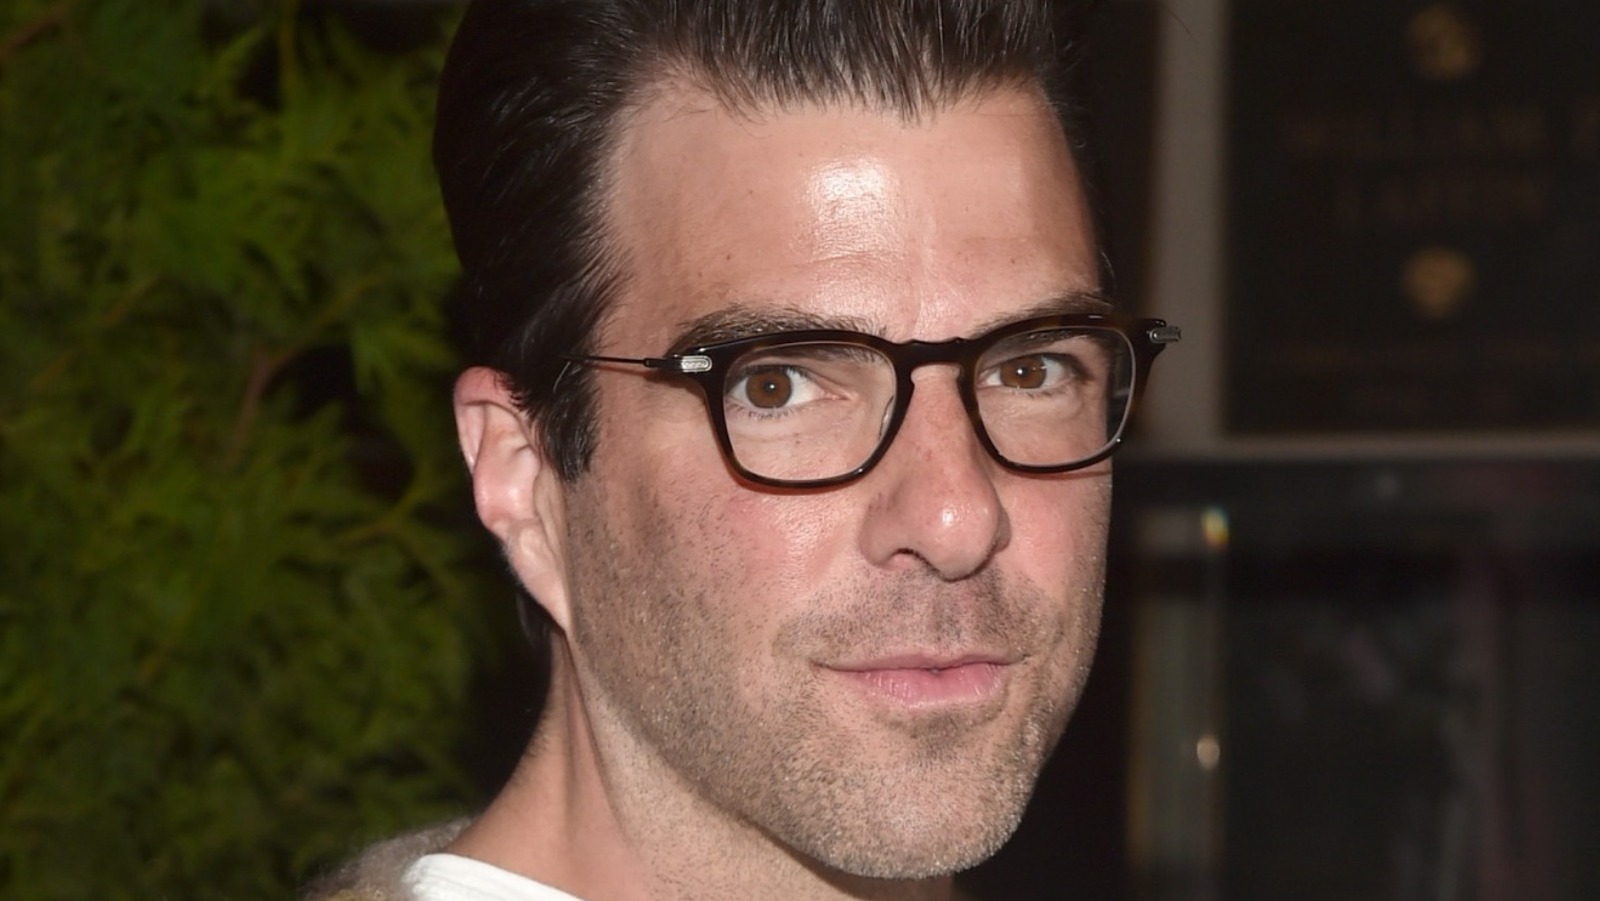 The Unexpected Reason Why Zachary Quinto Needed Glue To Film Star Trek